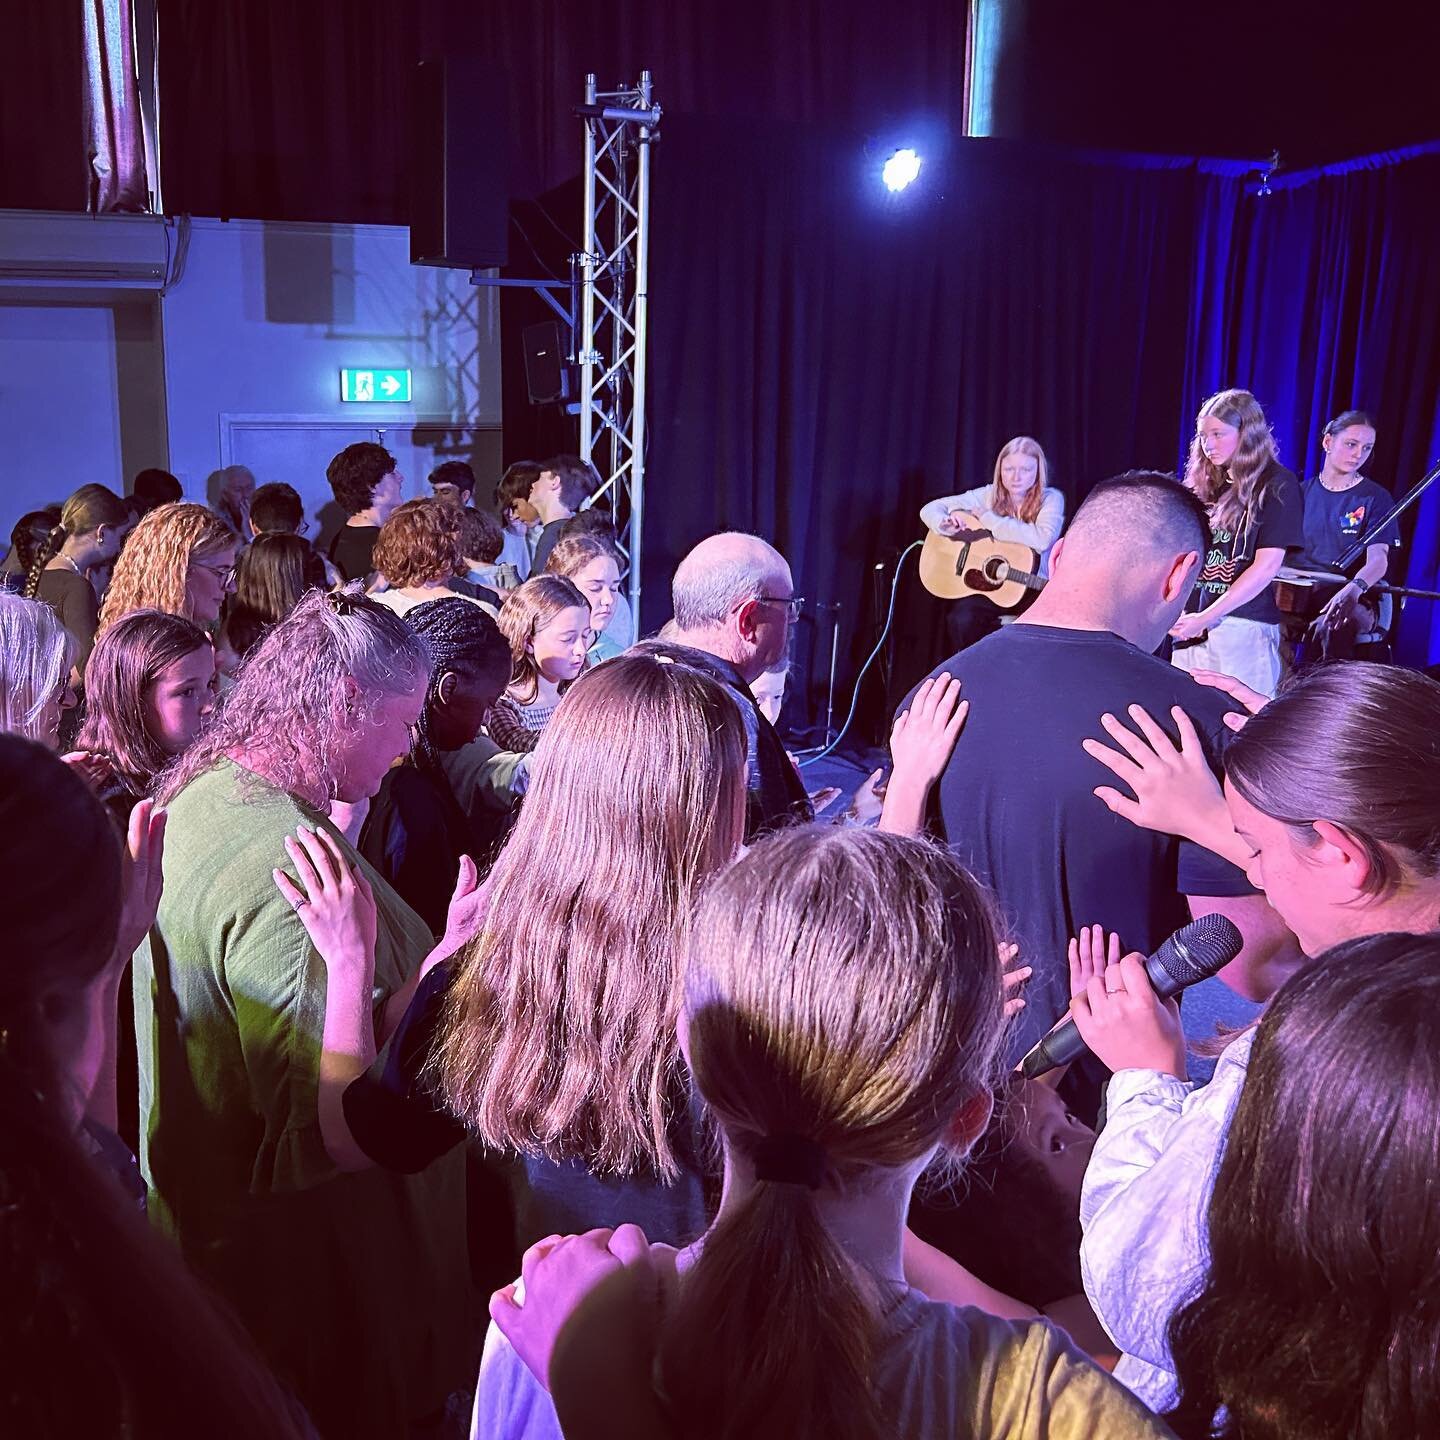 What a beautiful day we had at our family service today! Our church was filled with all generations coming together to worship, pray, and be inspired by the next generation. It was amazing to see our young ones take the stage and share, what God has 